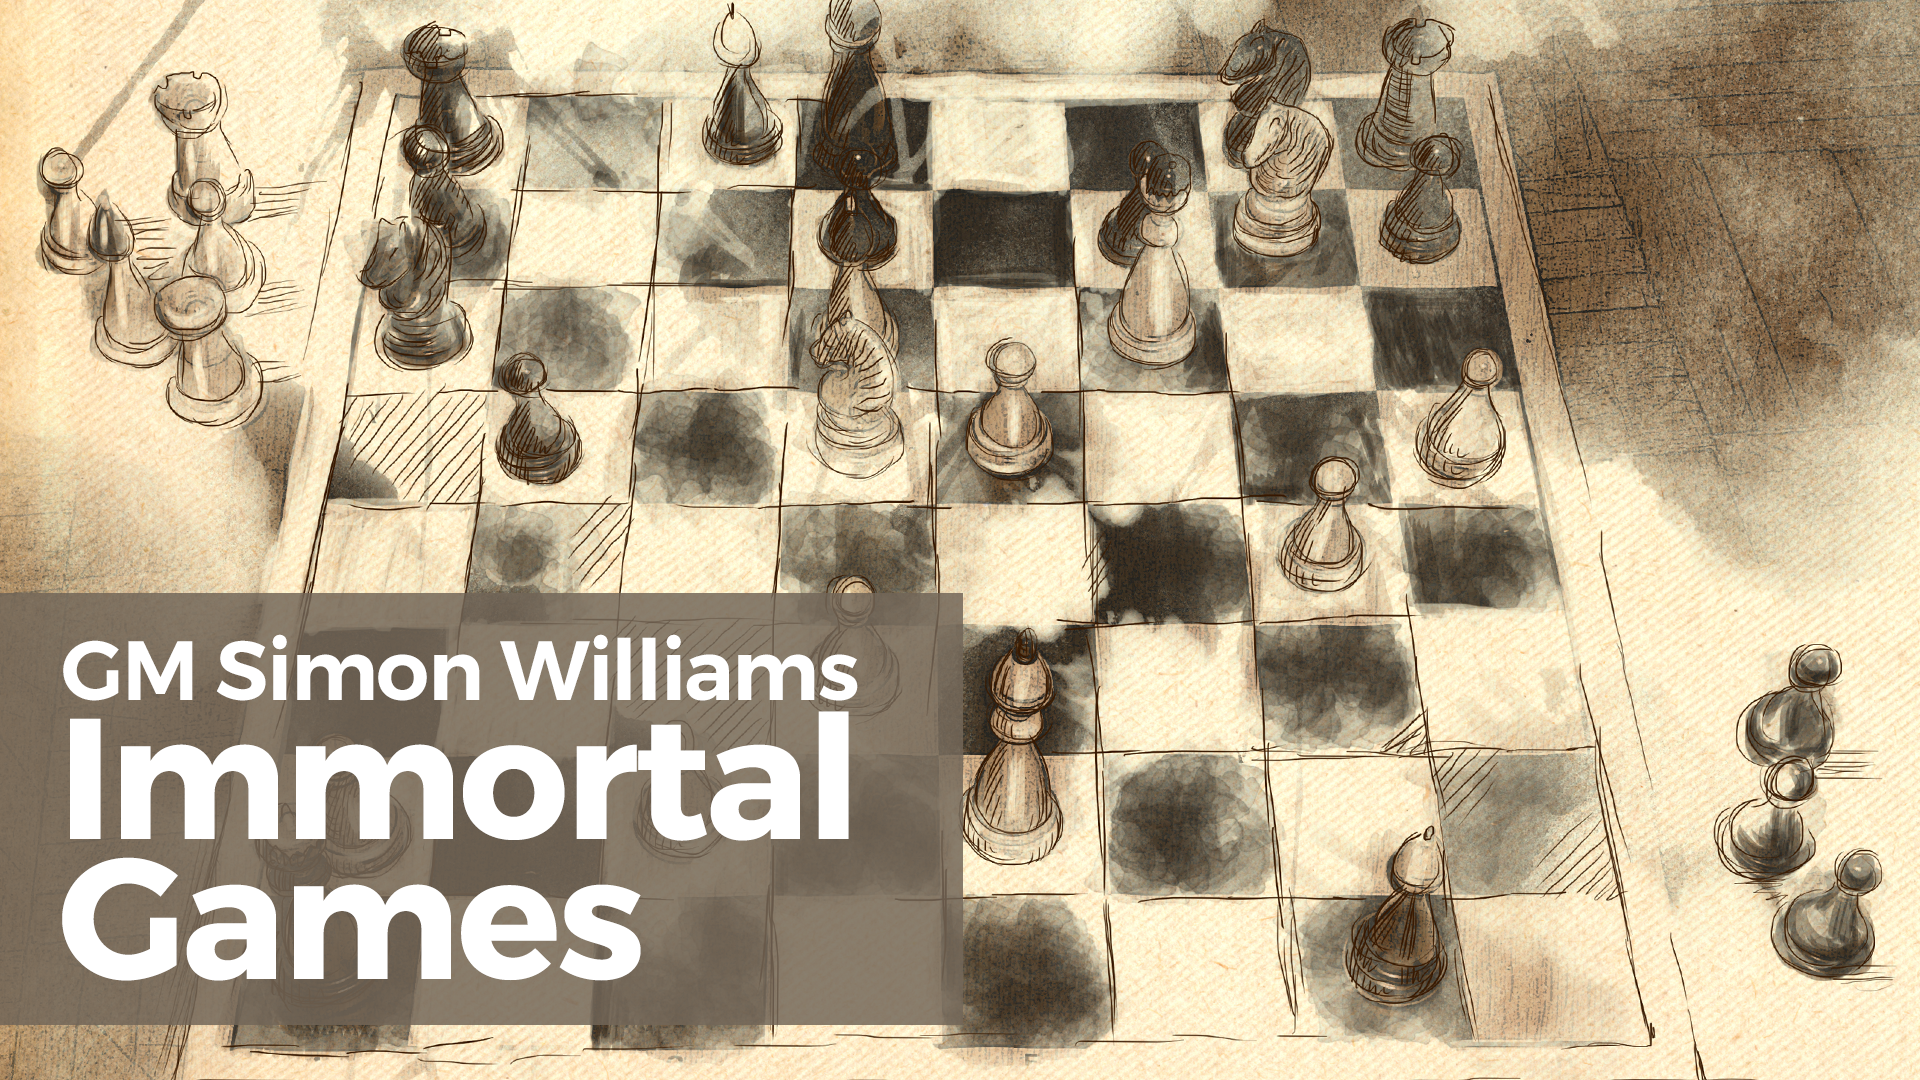 Free Chess Lessons: The immortal game